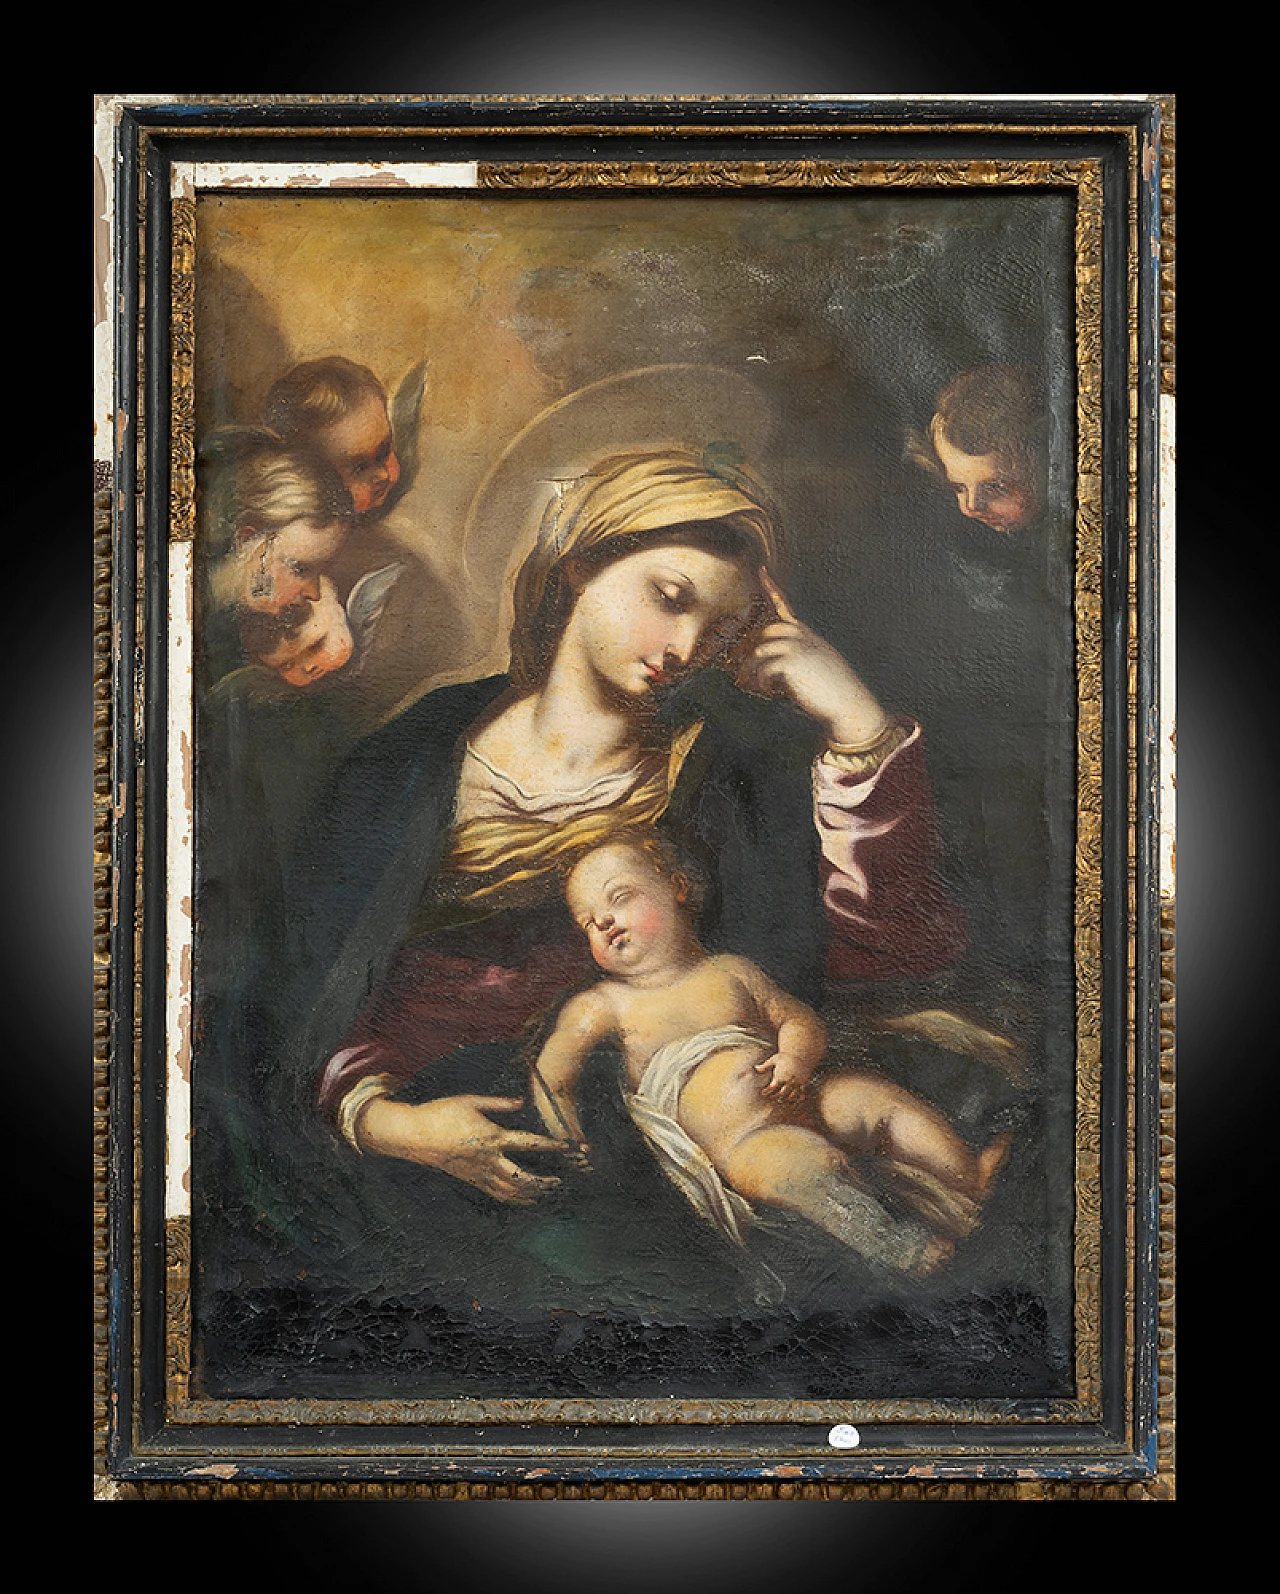 F. Solimena, Madonna and Child, oil painting on canvas, 18th century 1